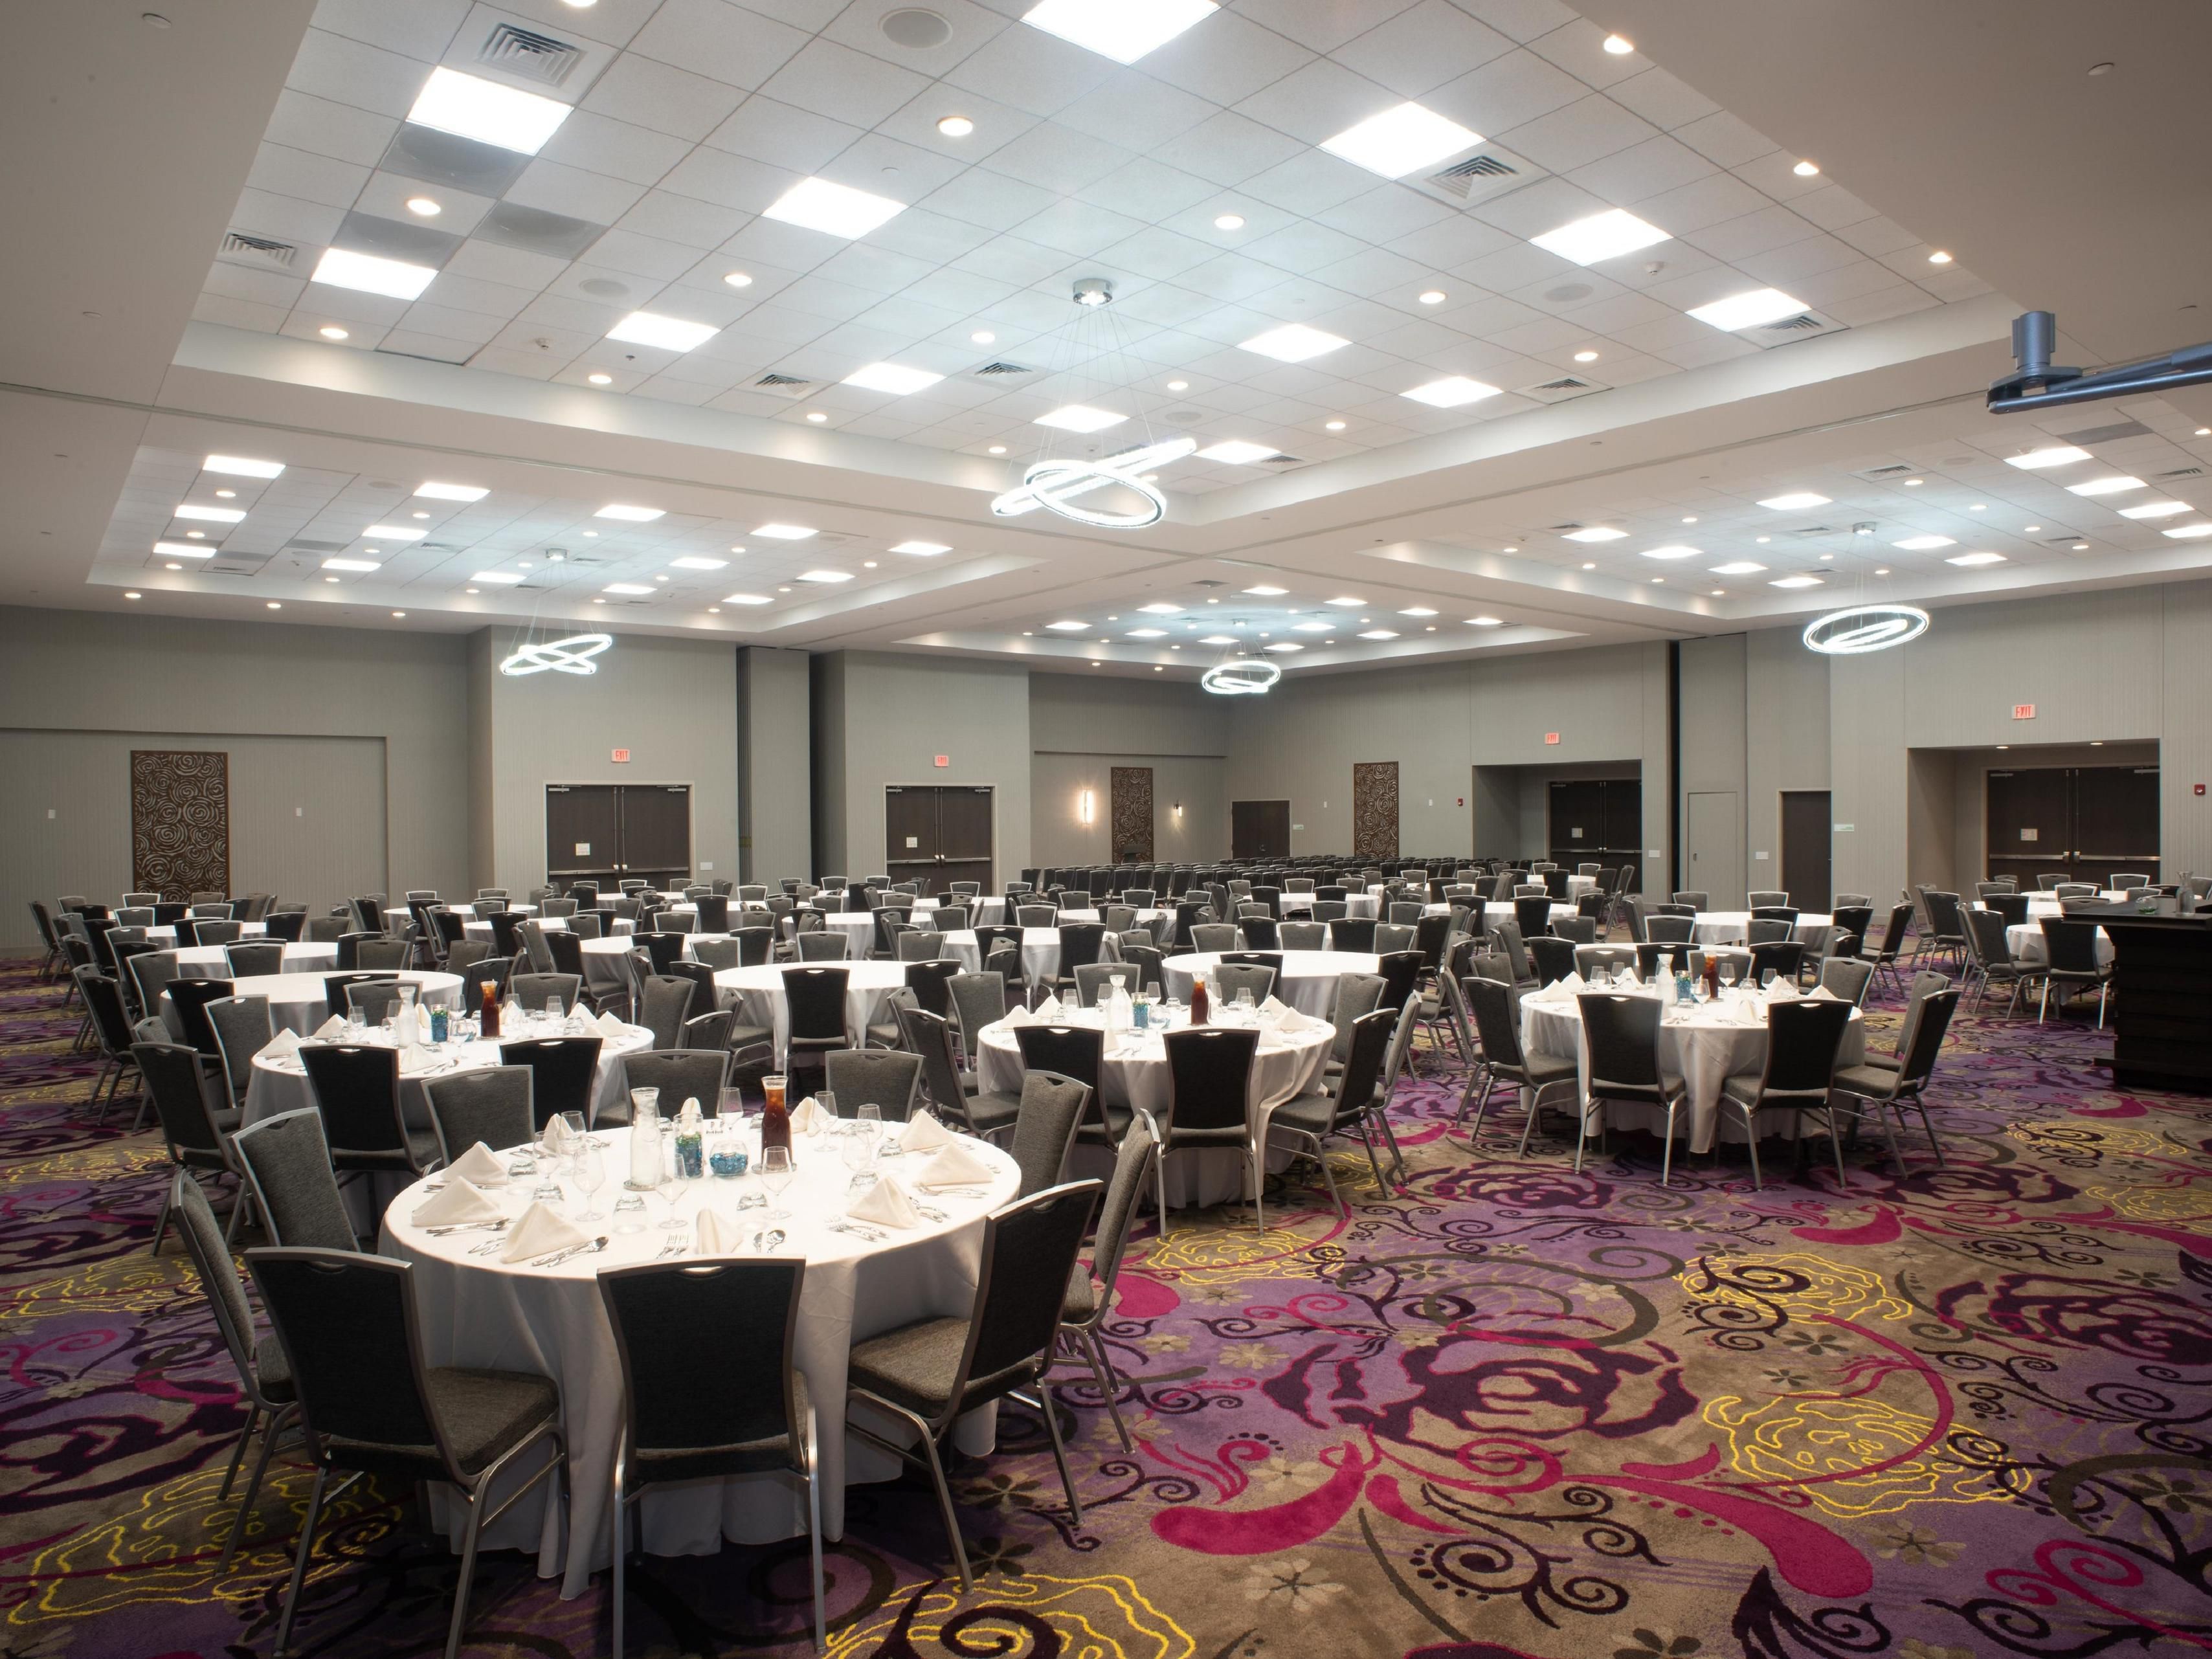 10,000 sq. ft. of flexible mtg space. Ballroom with 6,200 sq.ft can be broken into 4 separate meeting rooms. Three breakout rooms and a boardroom. Facilities can accommodate up to 700. Full service catering on site.